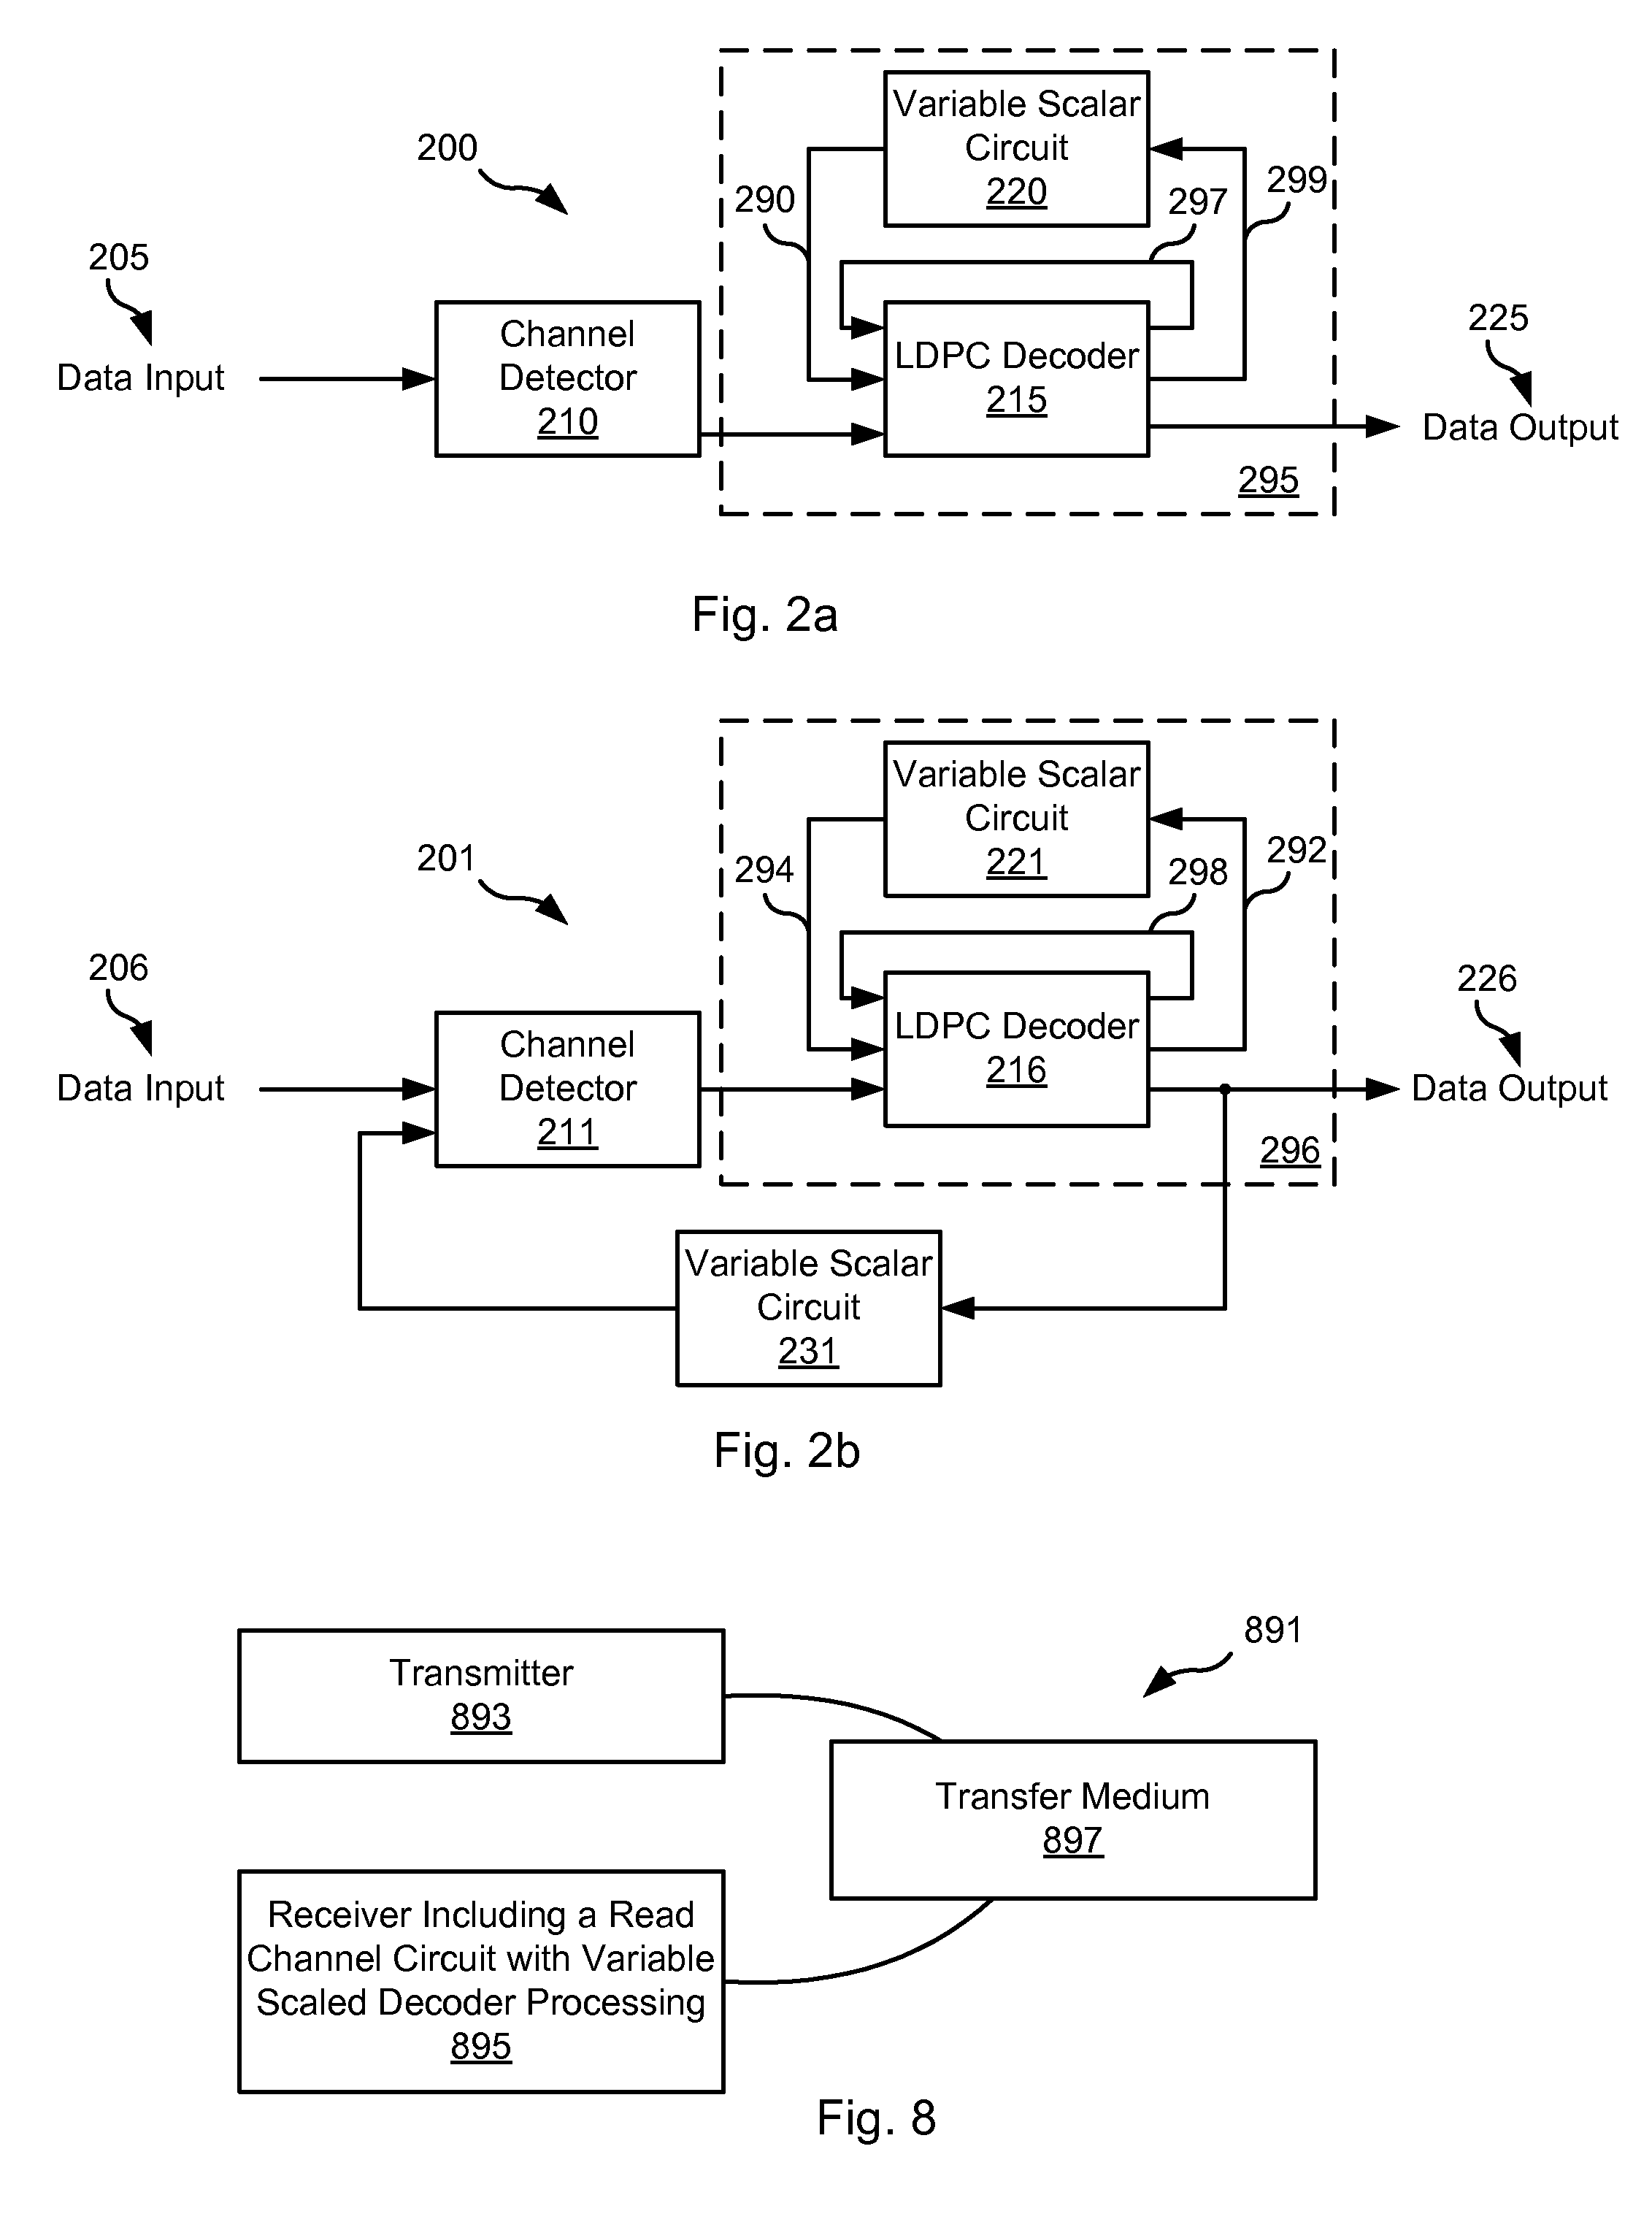 Systems and Methods for Dynamic Scaling in a Data Decoding System